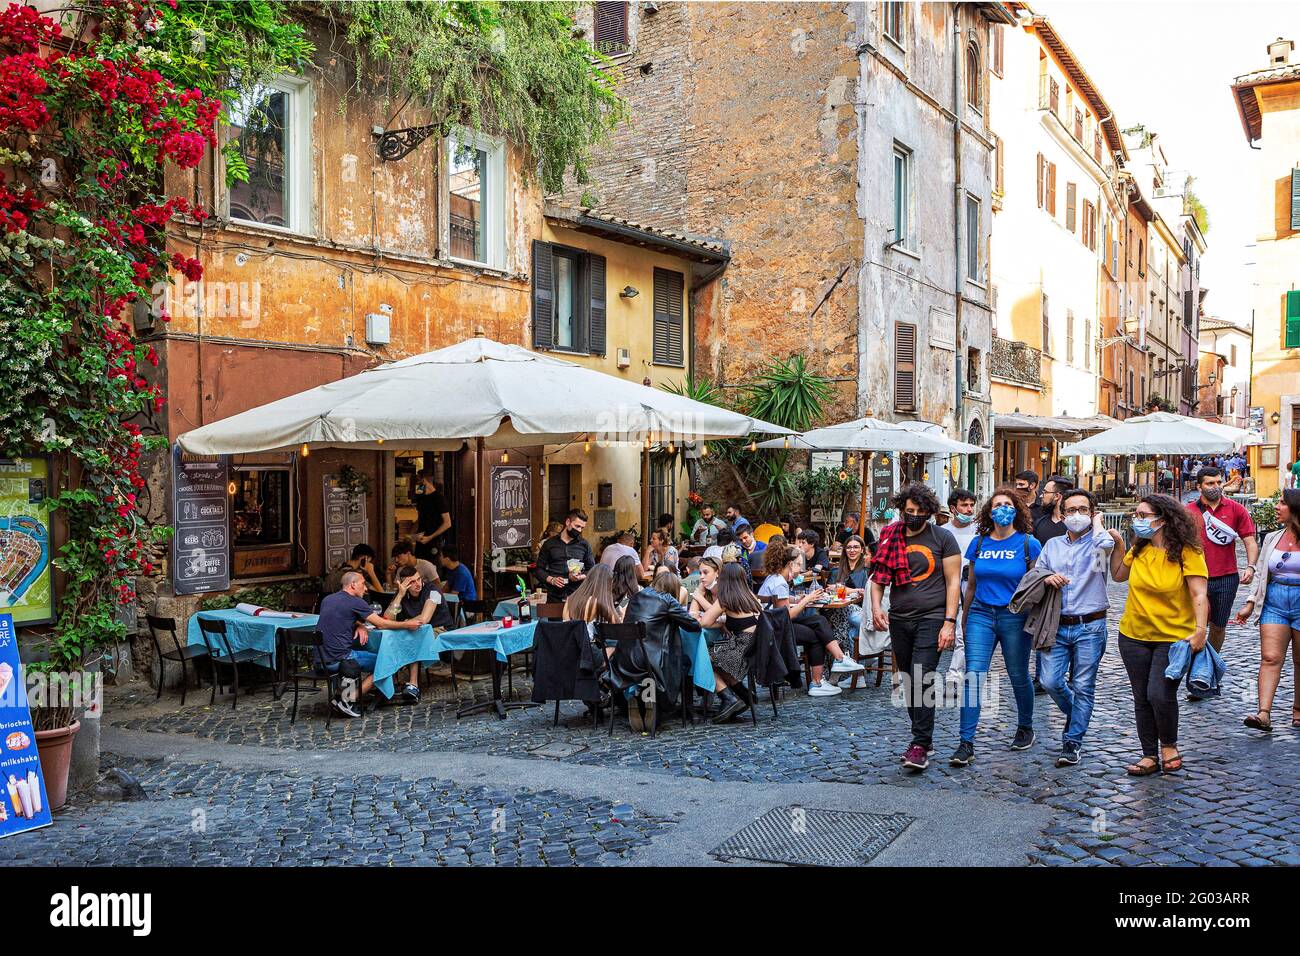 People sit outside a café in the artistic tourist area of Trastevere in Rome Stock Photo